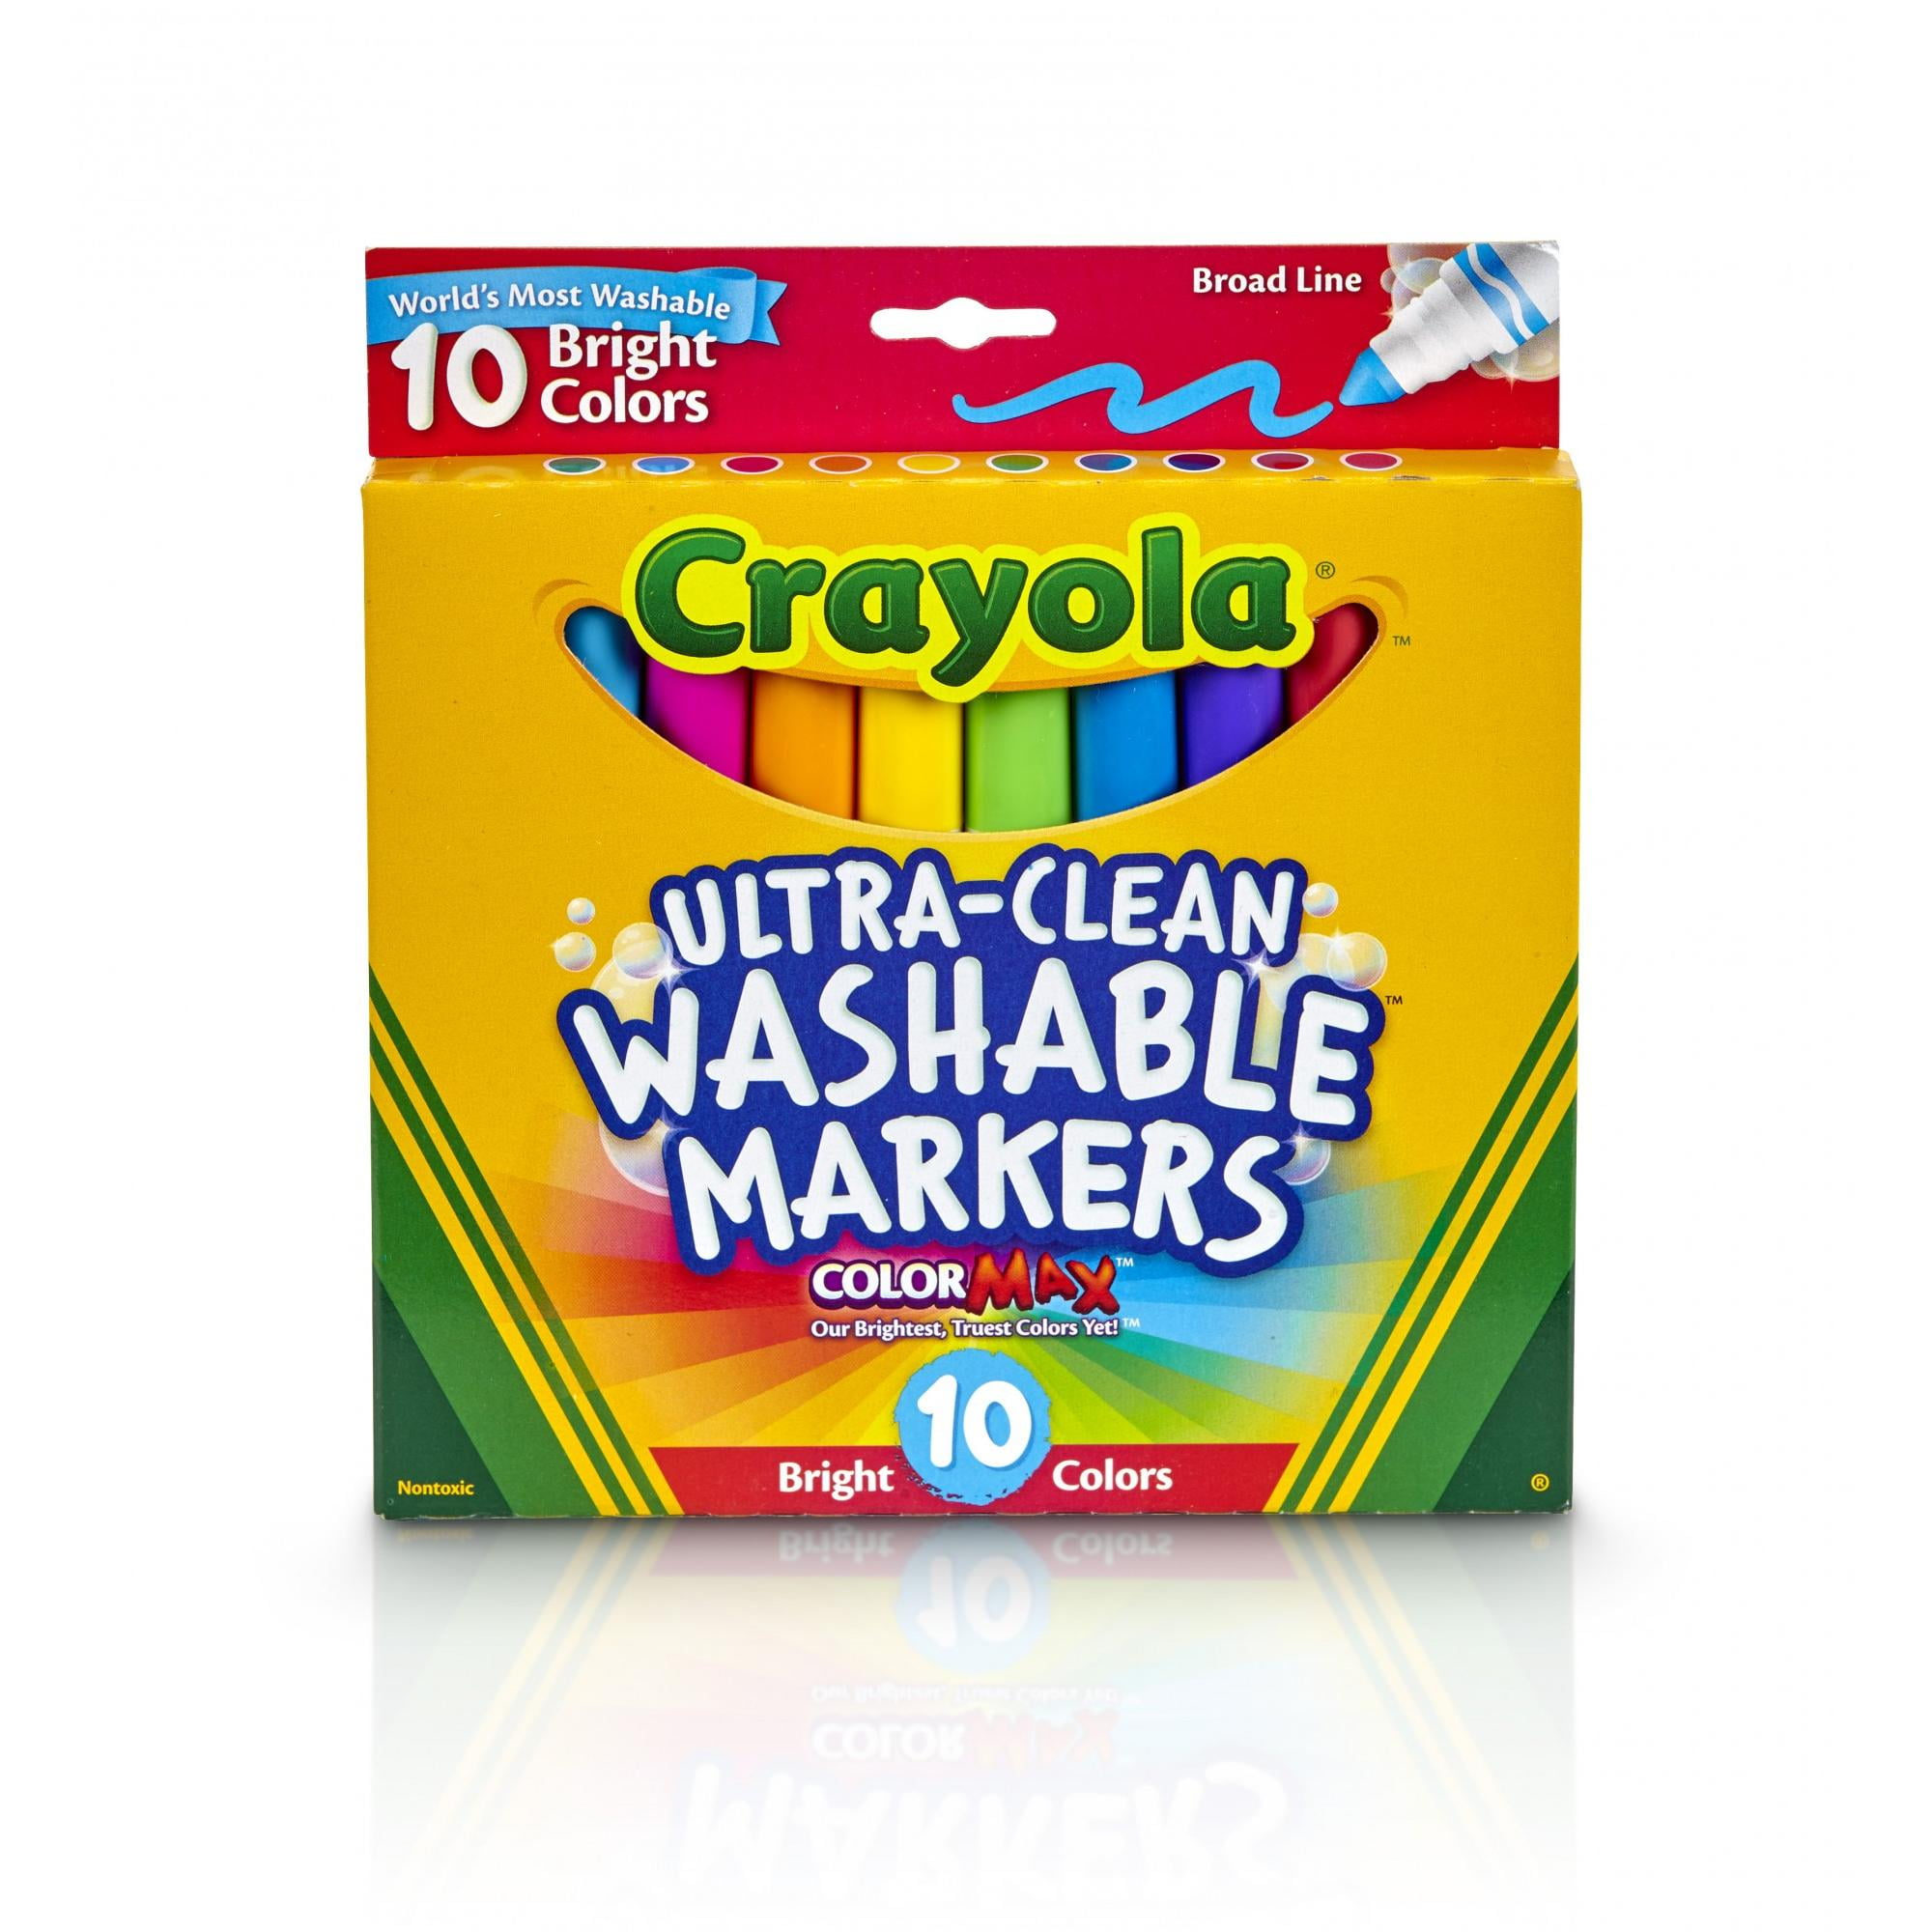 Crayola Ultra-Clean Bright Broad Line Marker, 10 Count 